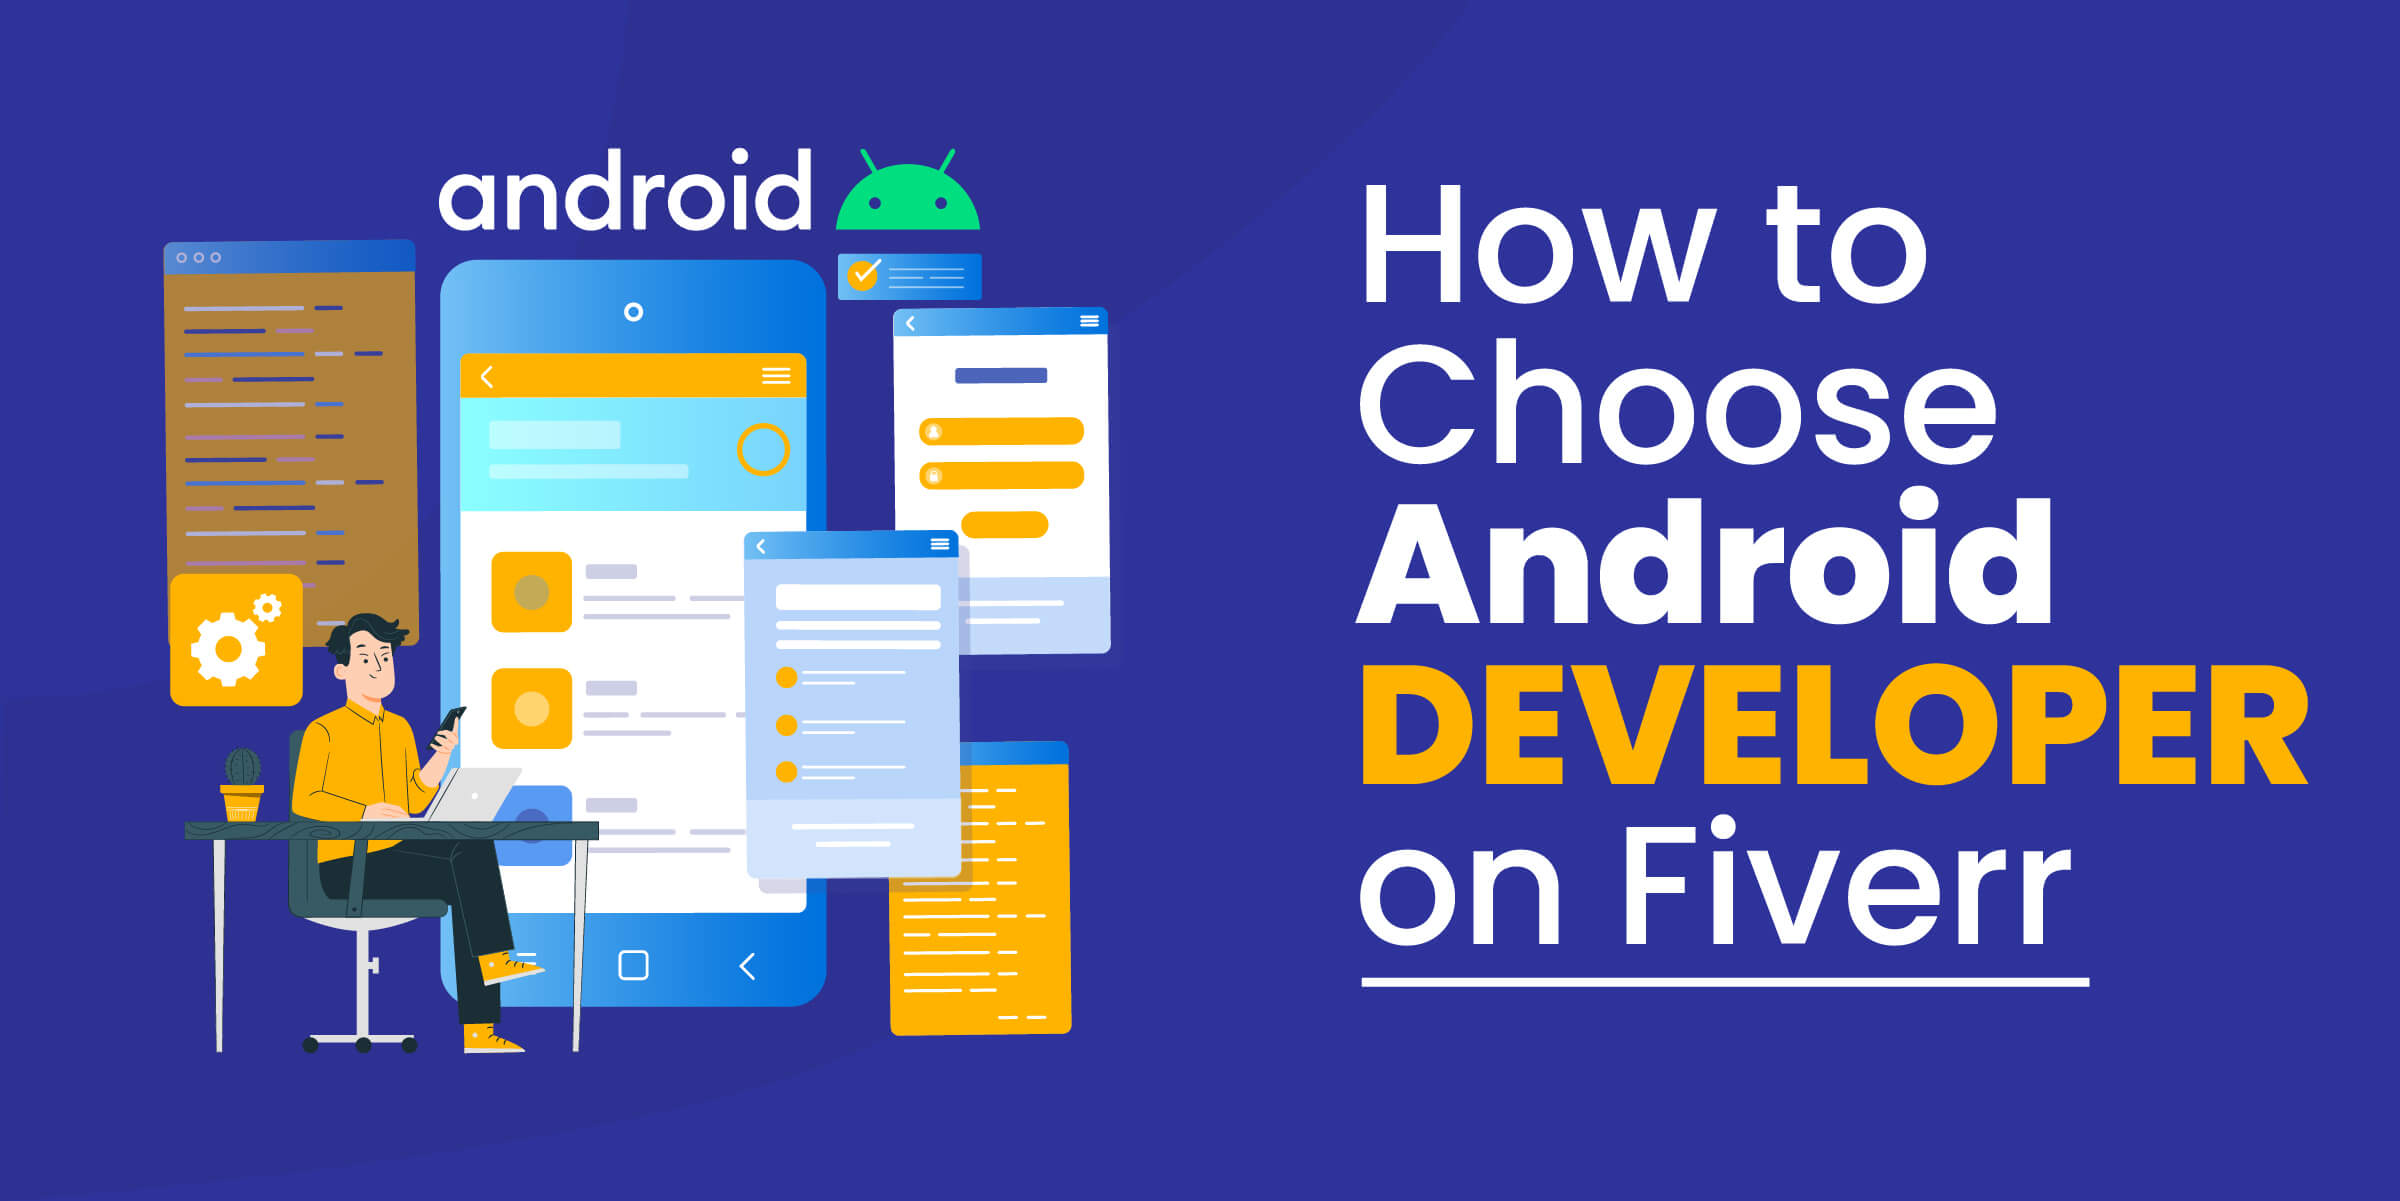 How to Choose Android Developer